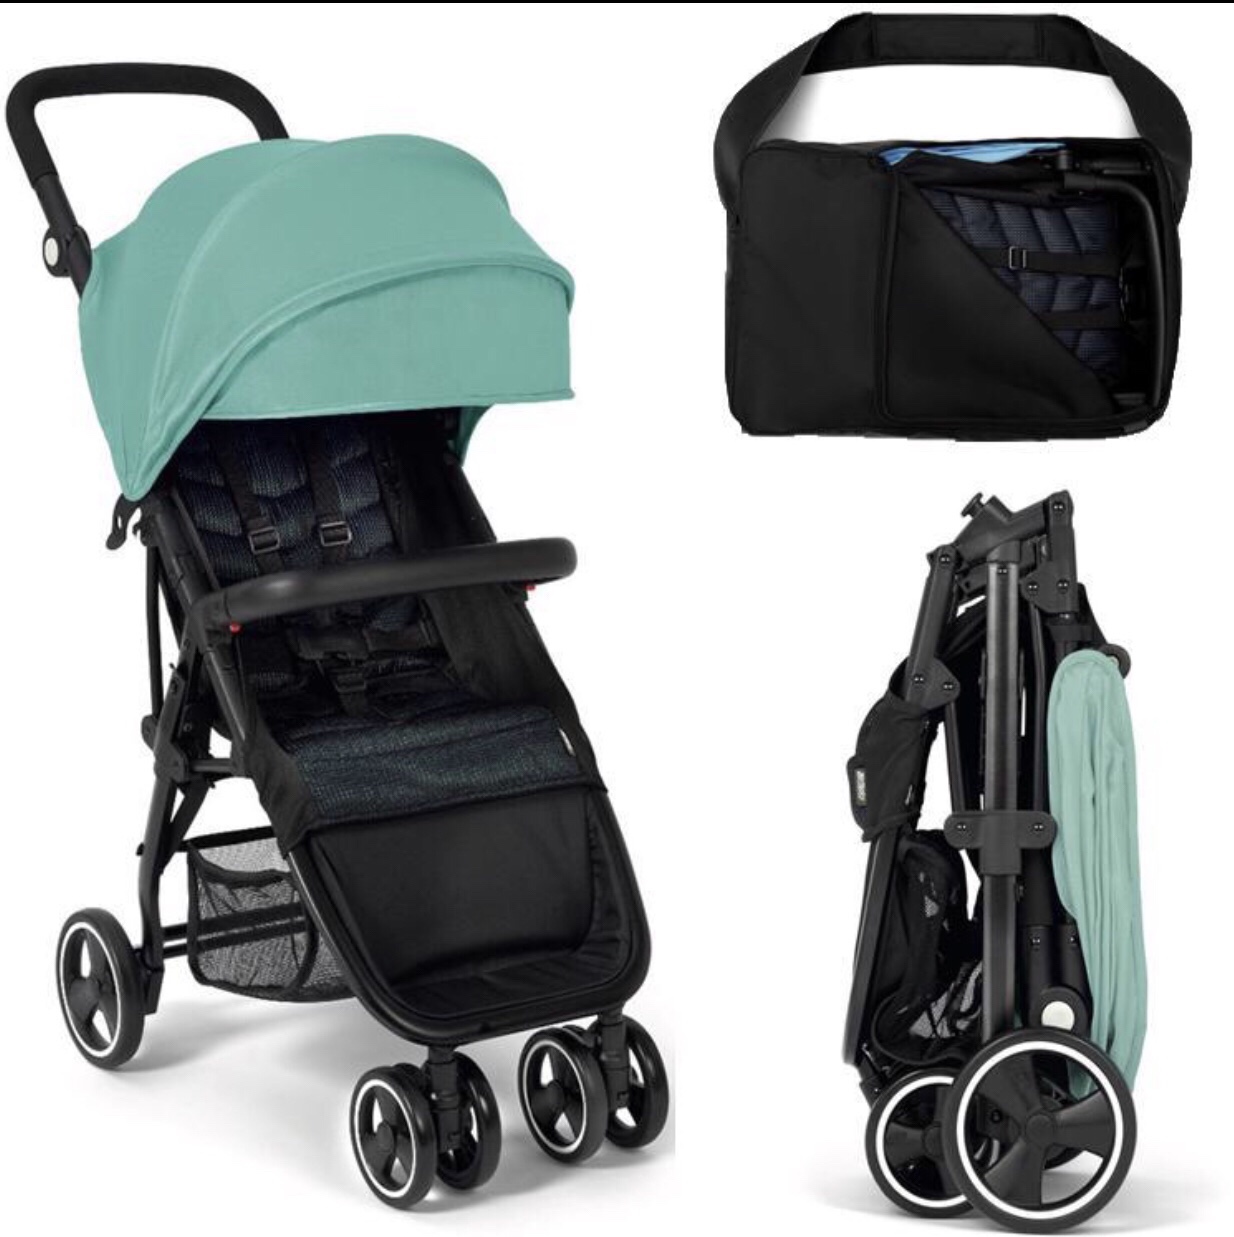 mamas and papas acro stroller review